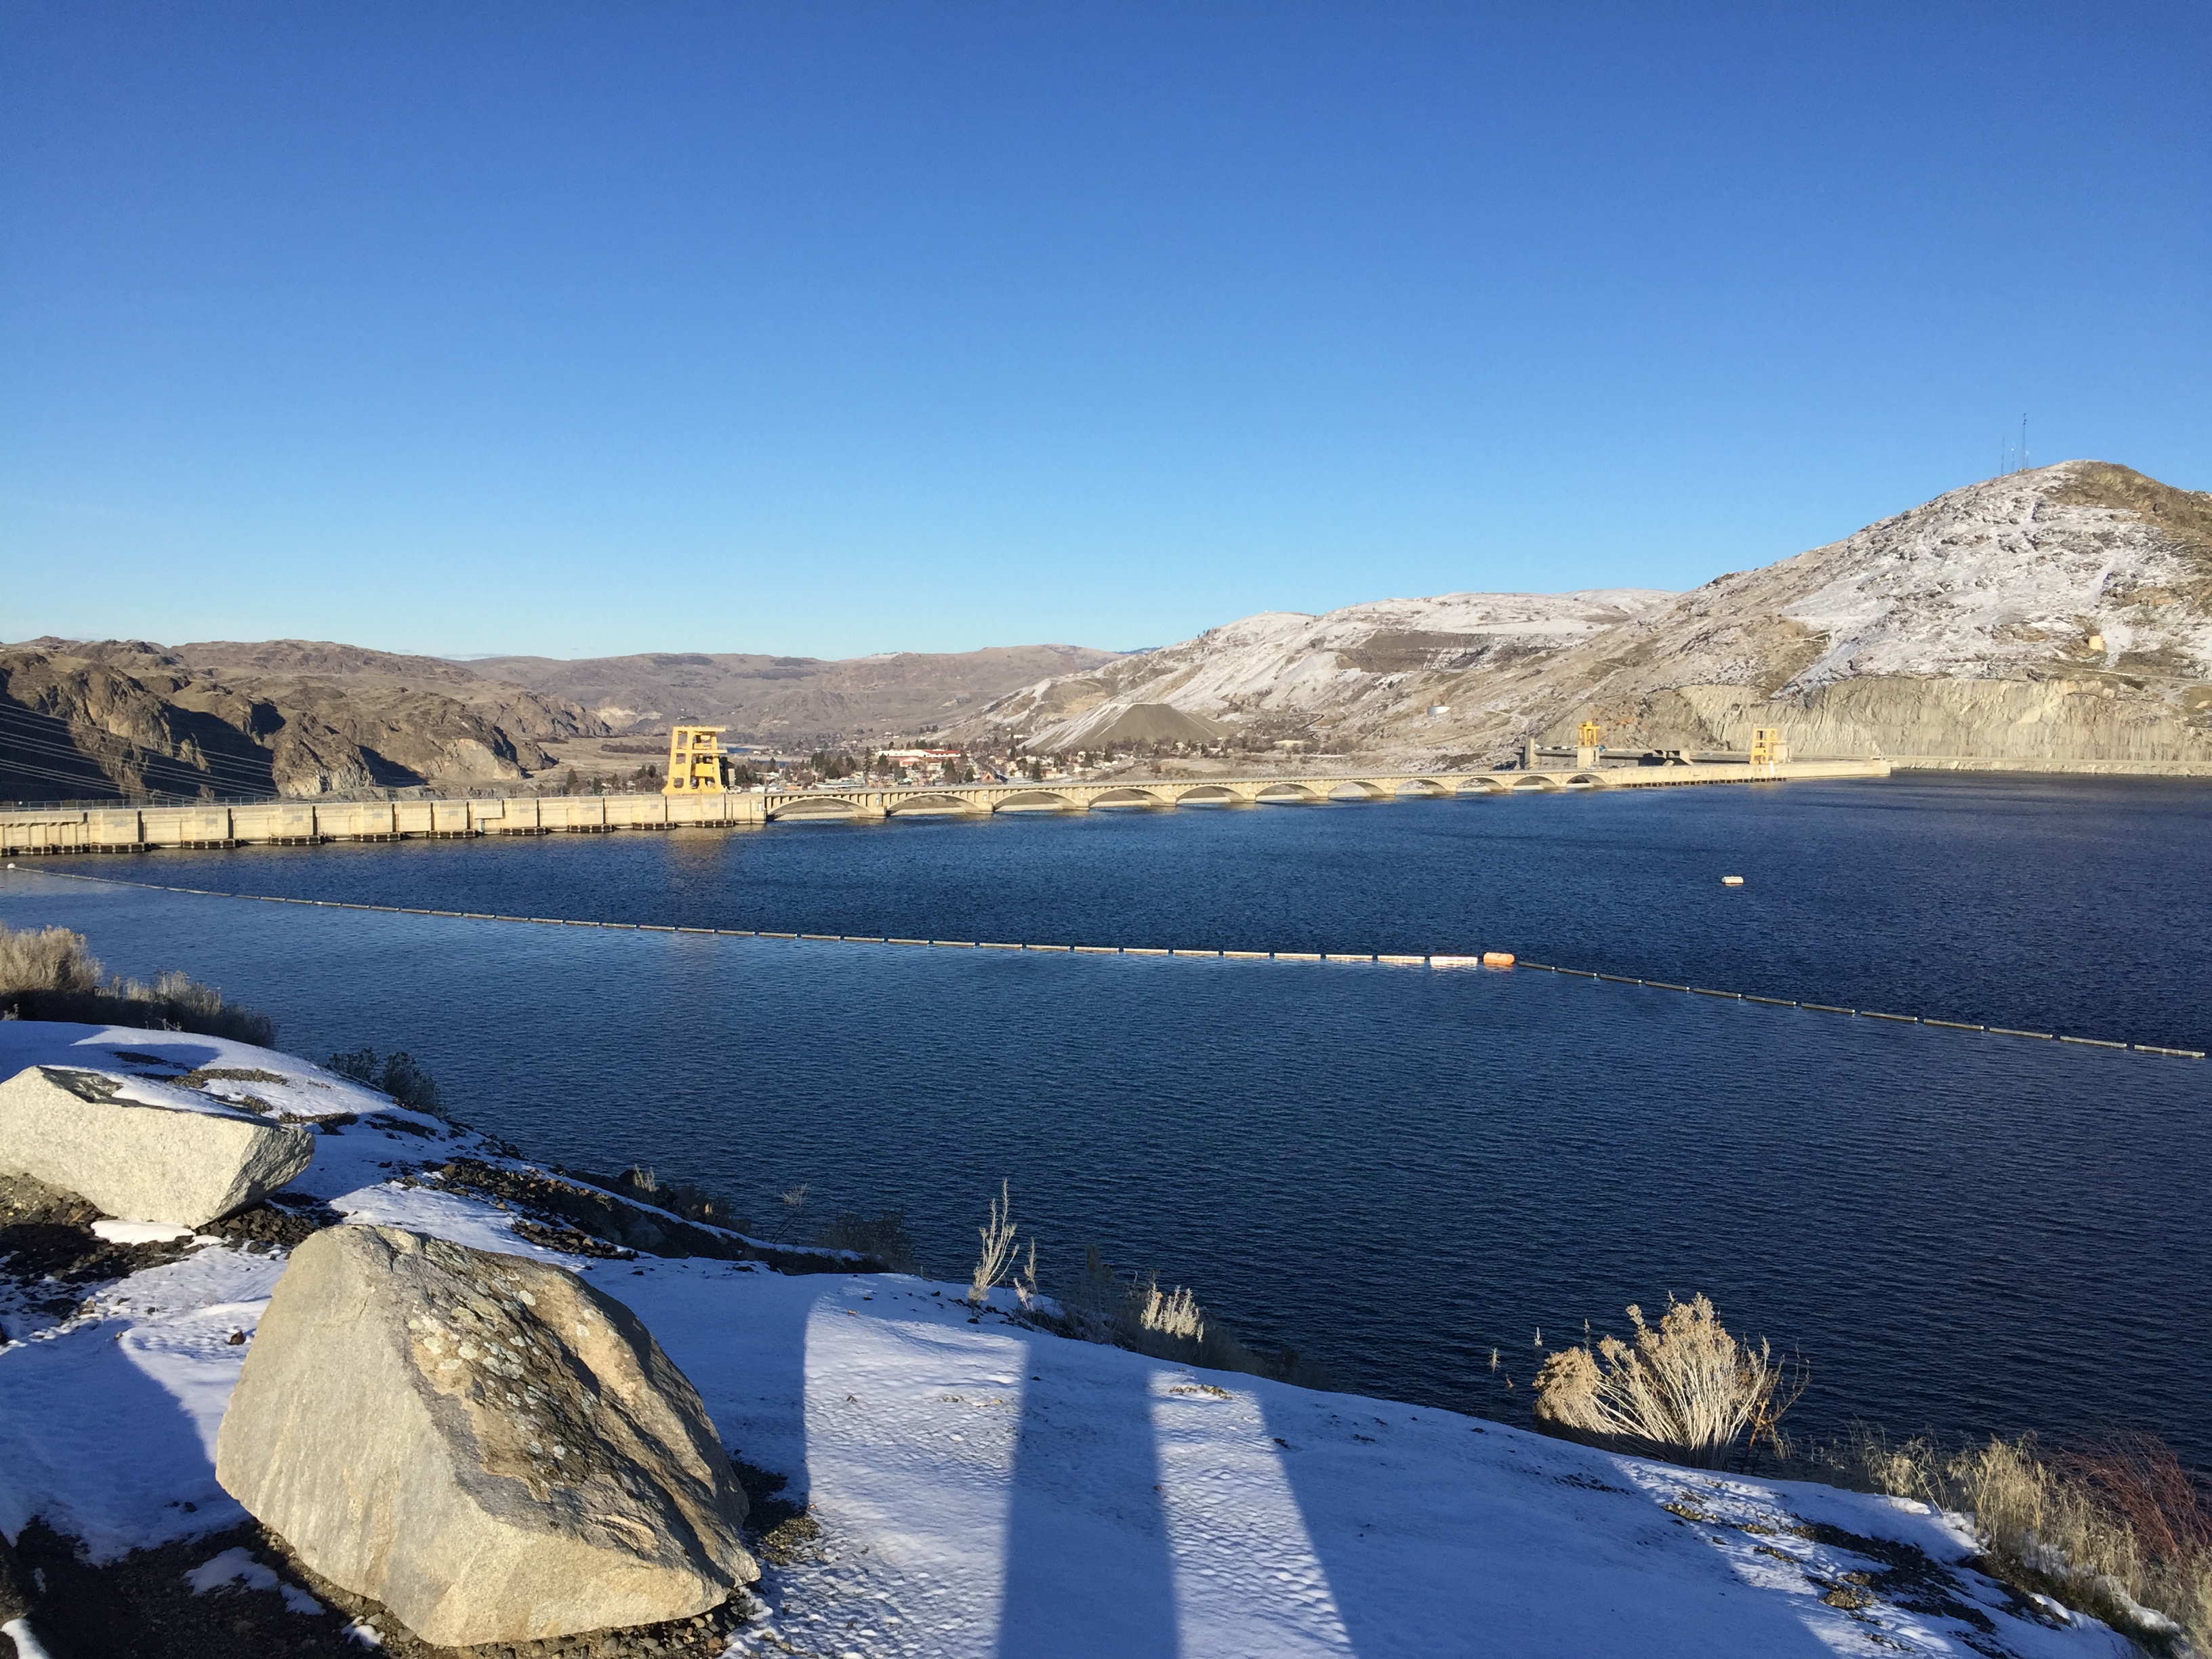 The Grand Coulee Dam is the largest hydropower project in the USA, generating more than 21 billion kilowatt-hours of electricity each year – the equivalent of more than 2.3 million US homes.